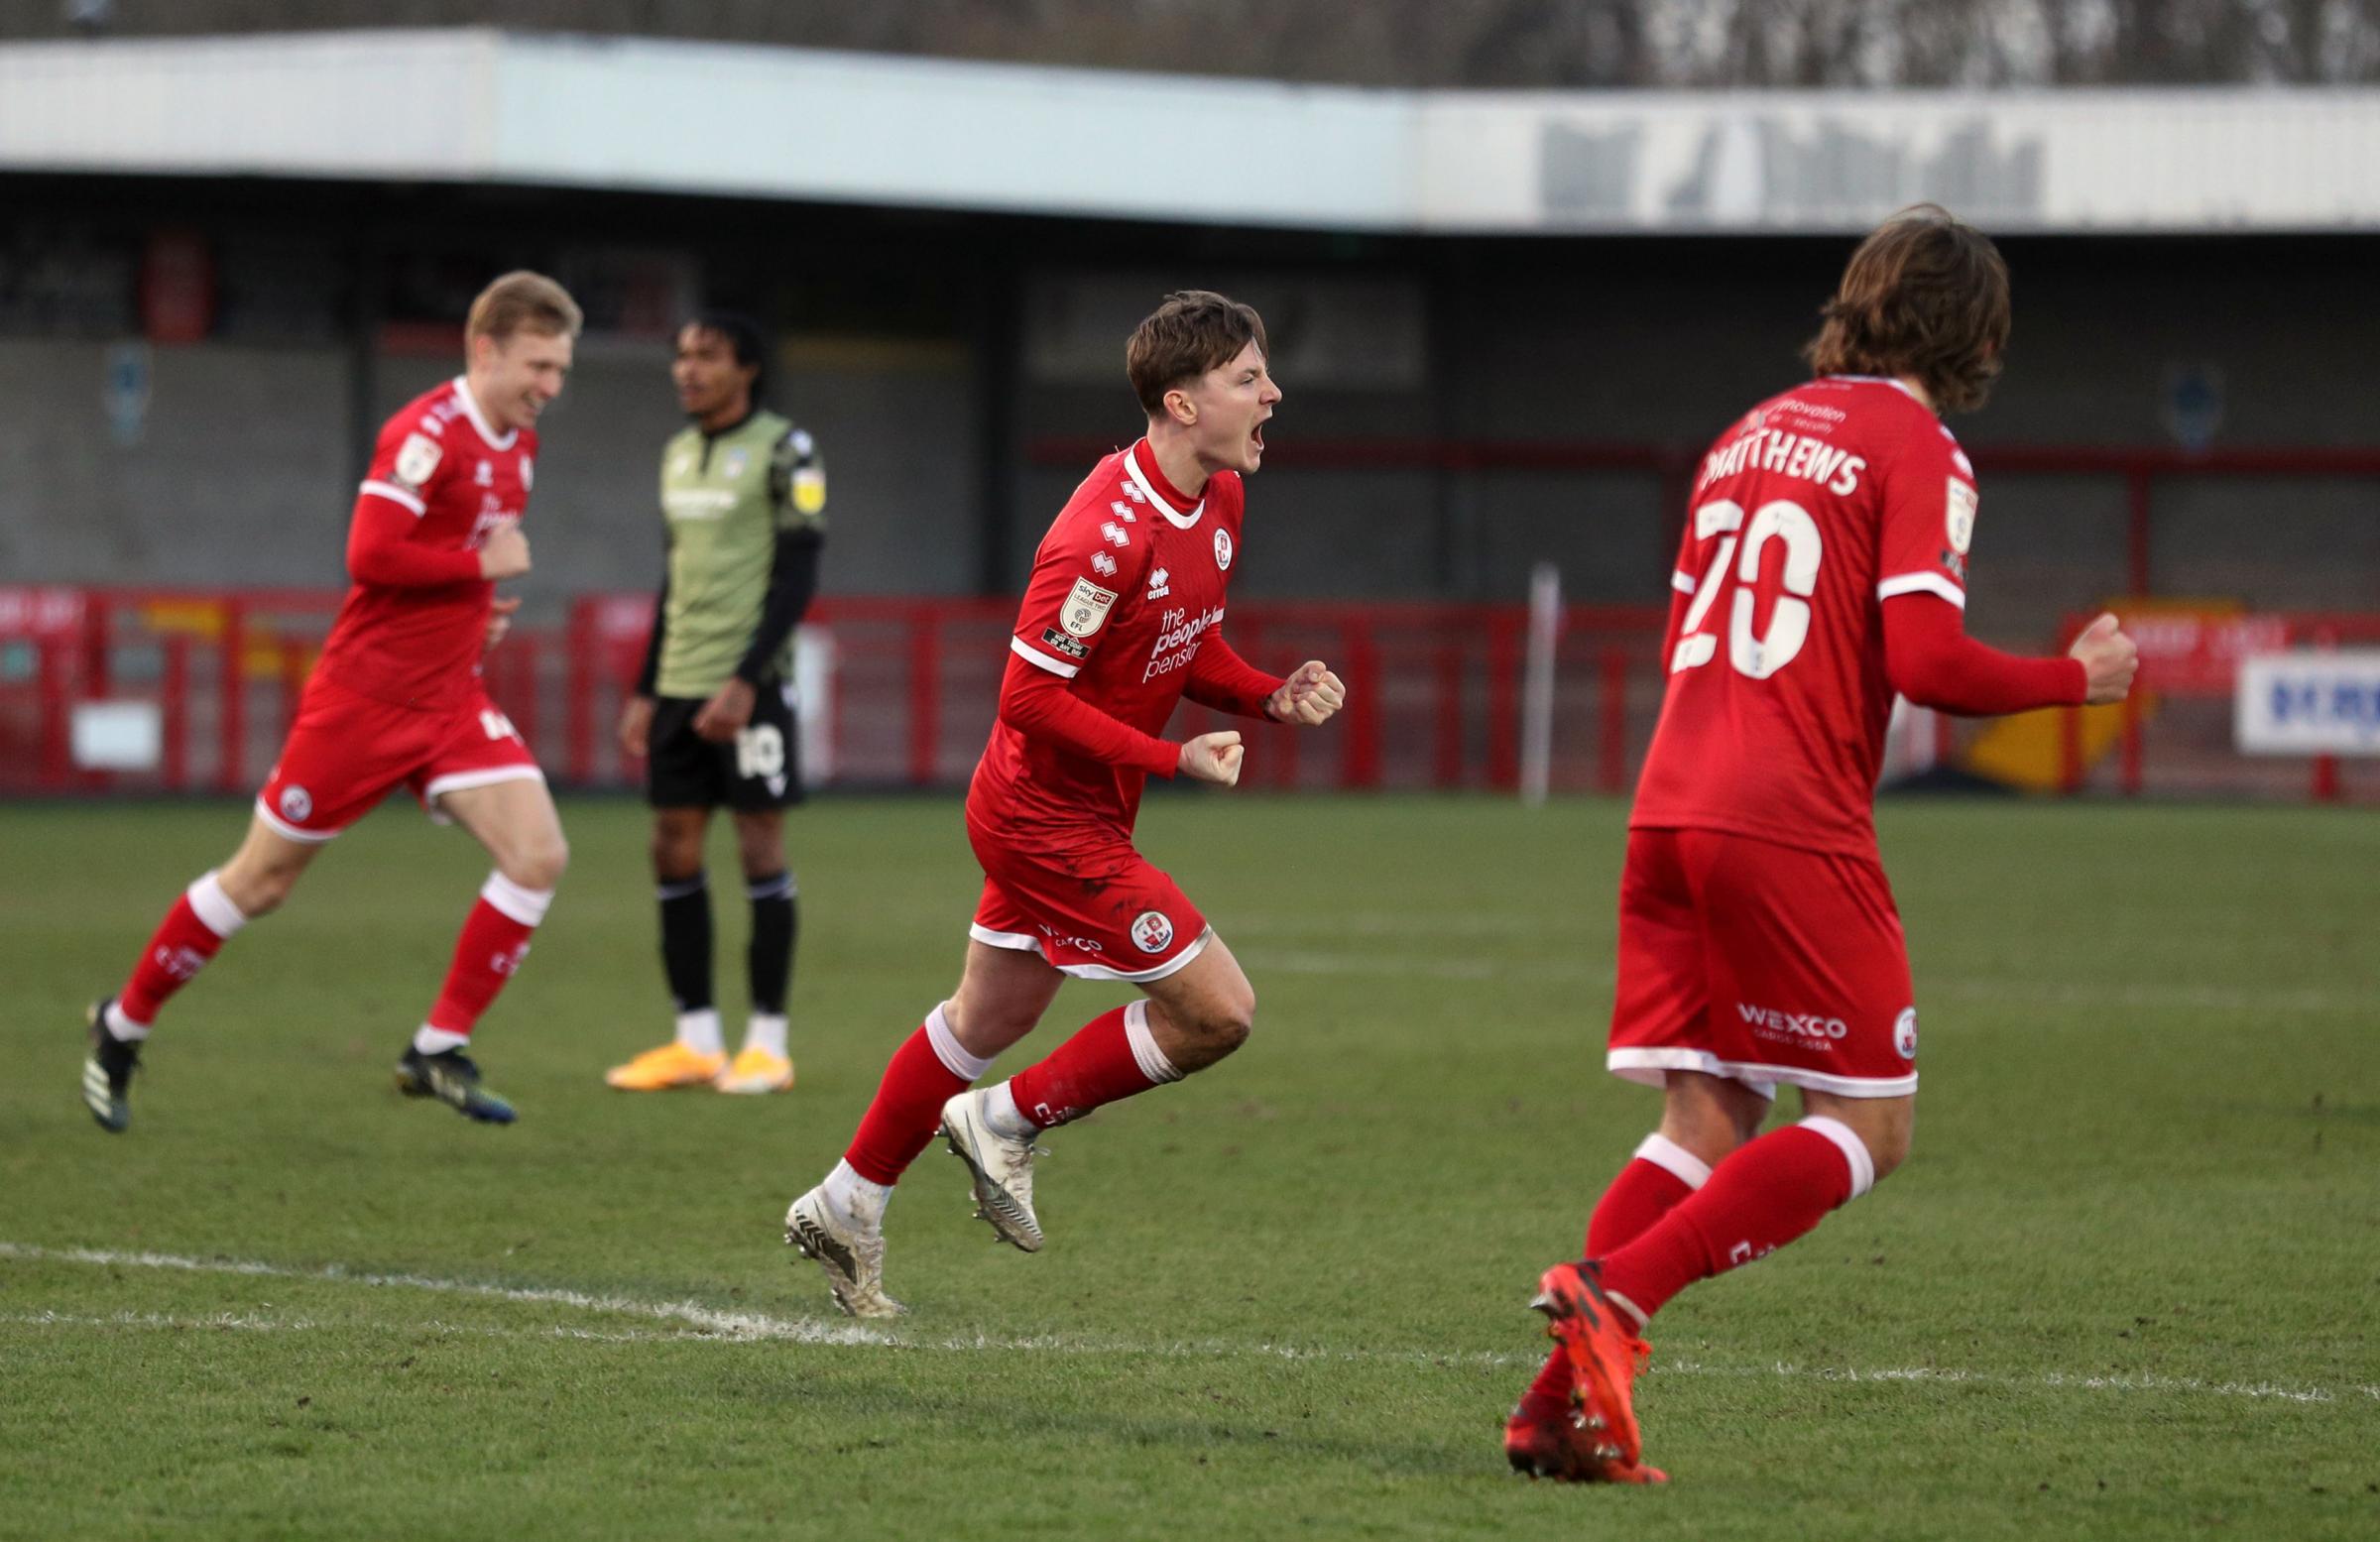 Crawley close in on play-off places as Archie Davies, James Tiley and Jordan Maguire-Drew shine